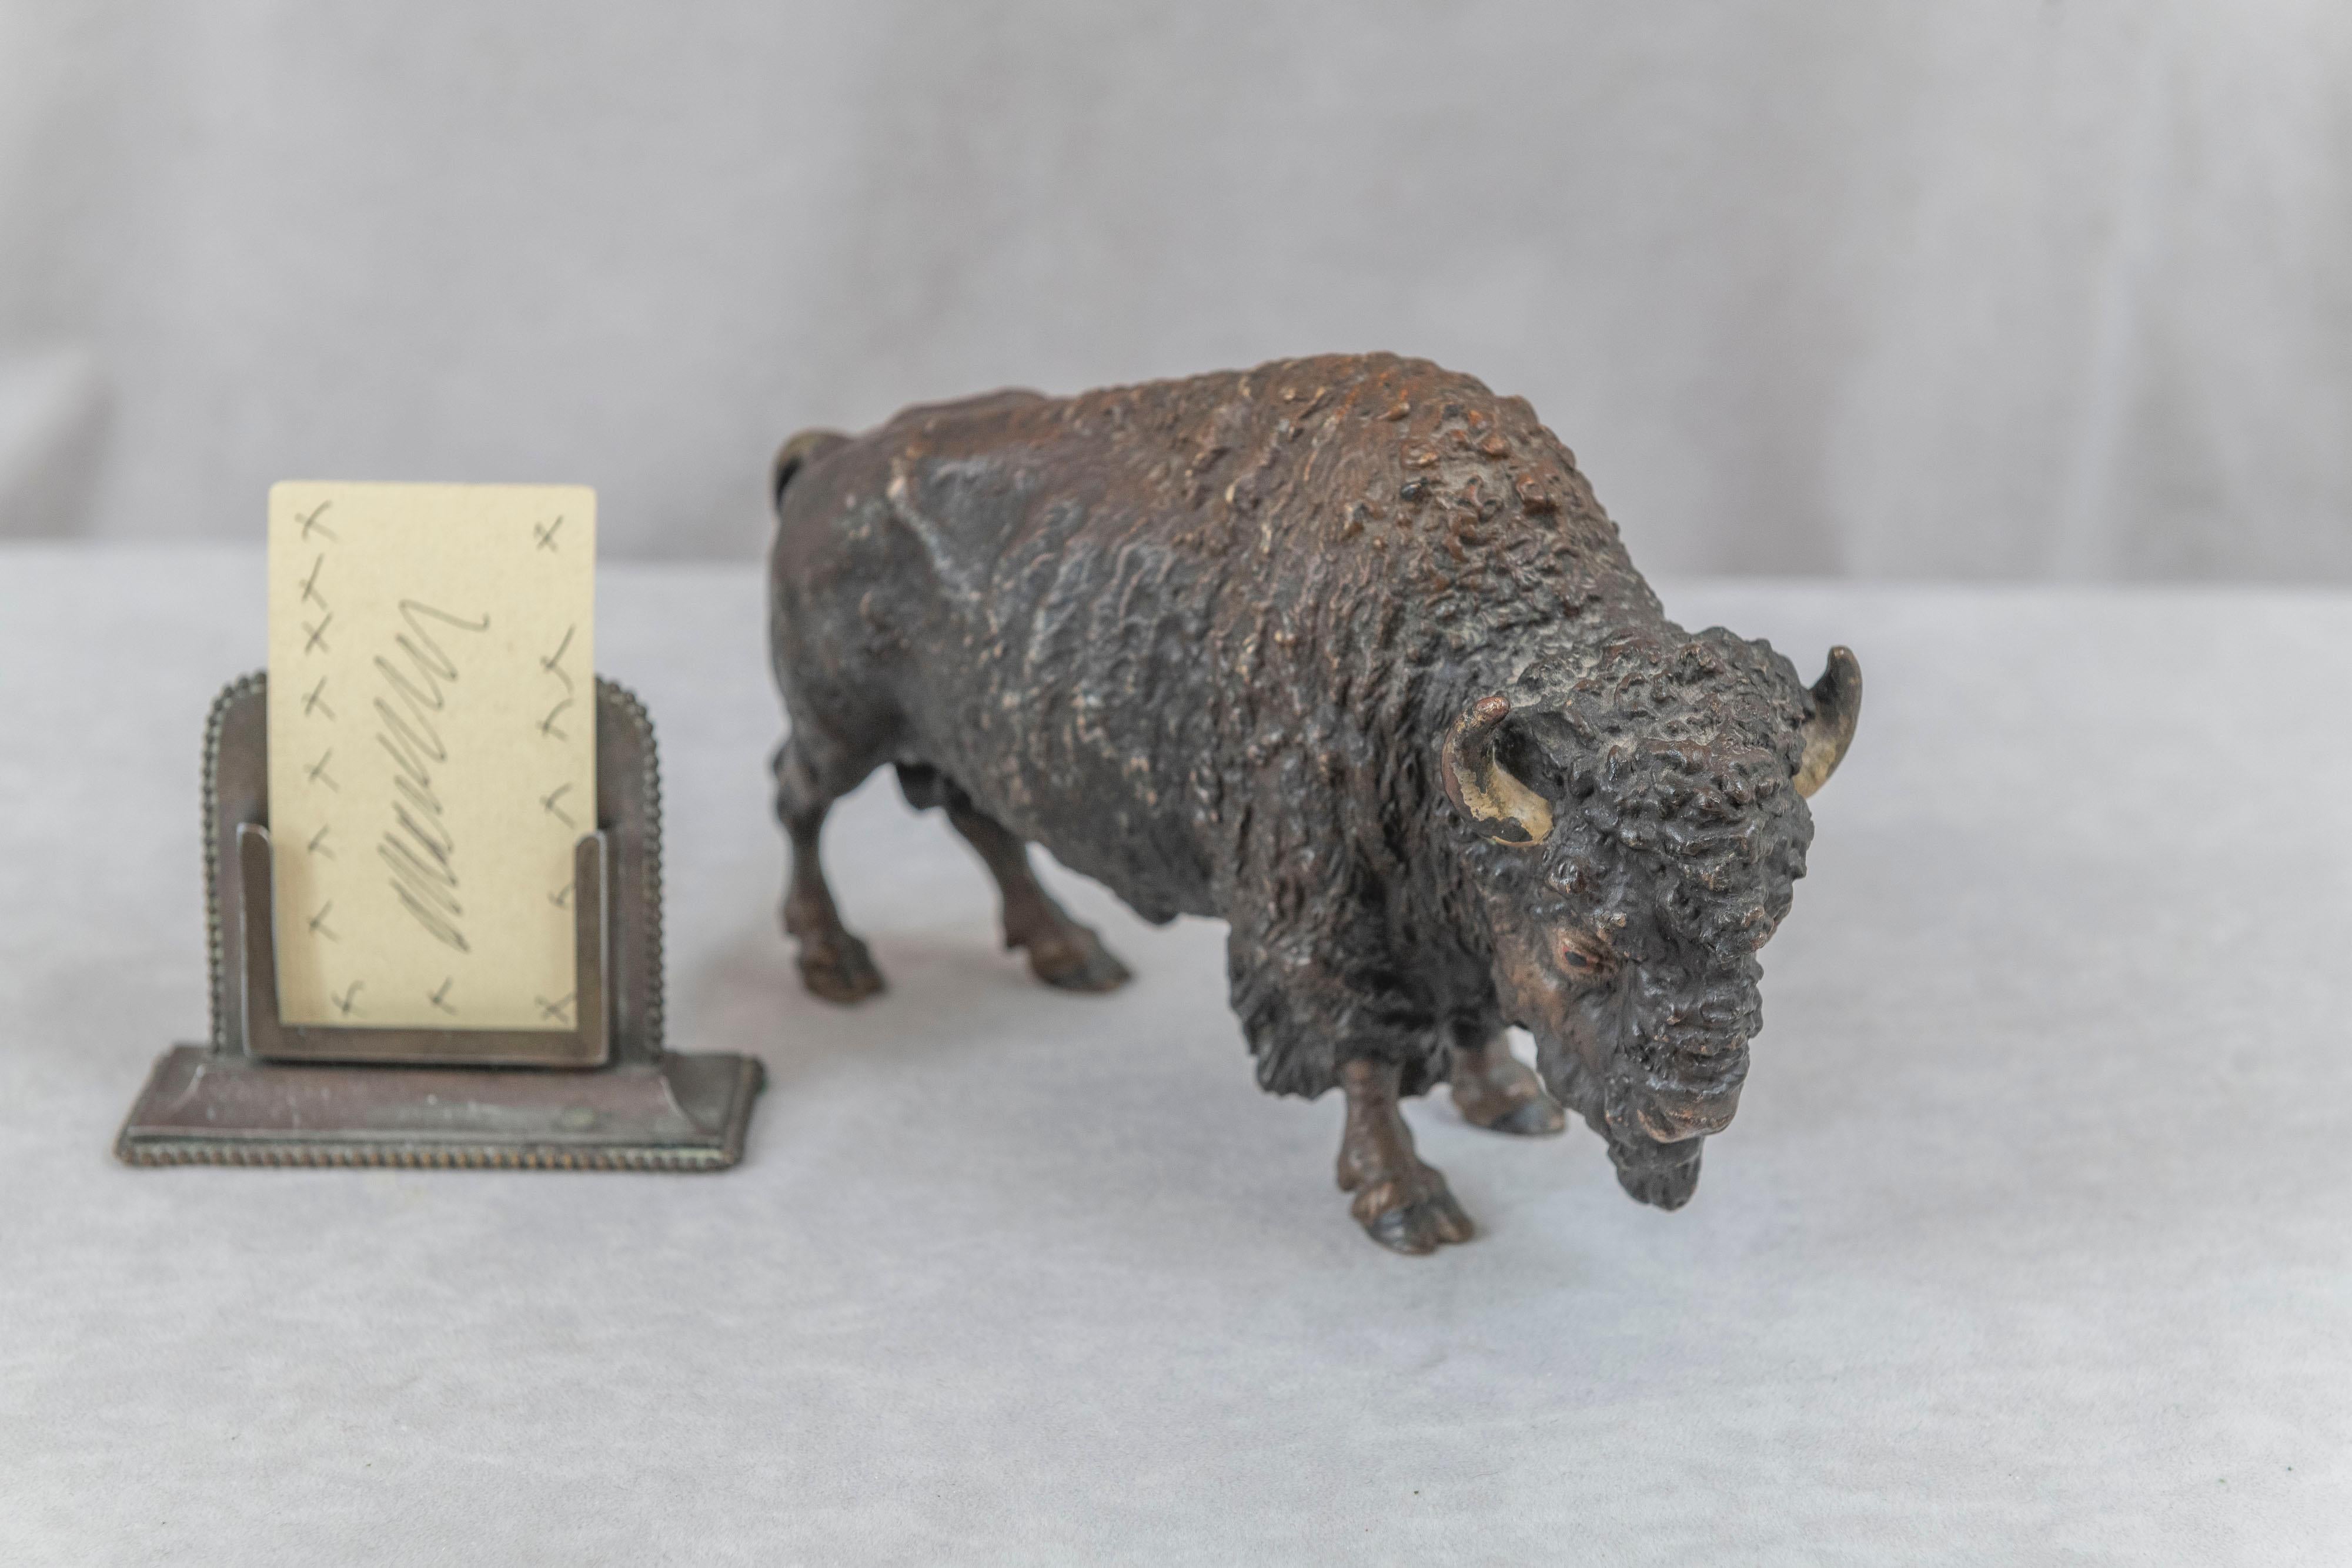  This exceptionally large and detailed bronze of a Bison is the work of one of the best artists of his time Carl Kauba (1865-1922). While unsigned it bears the mark 